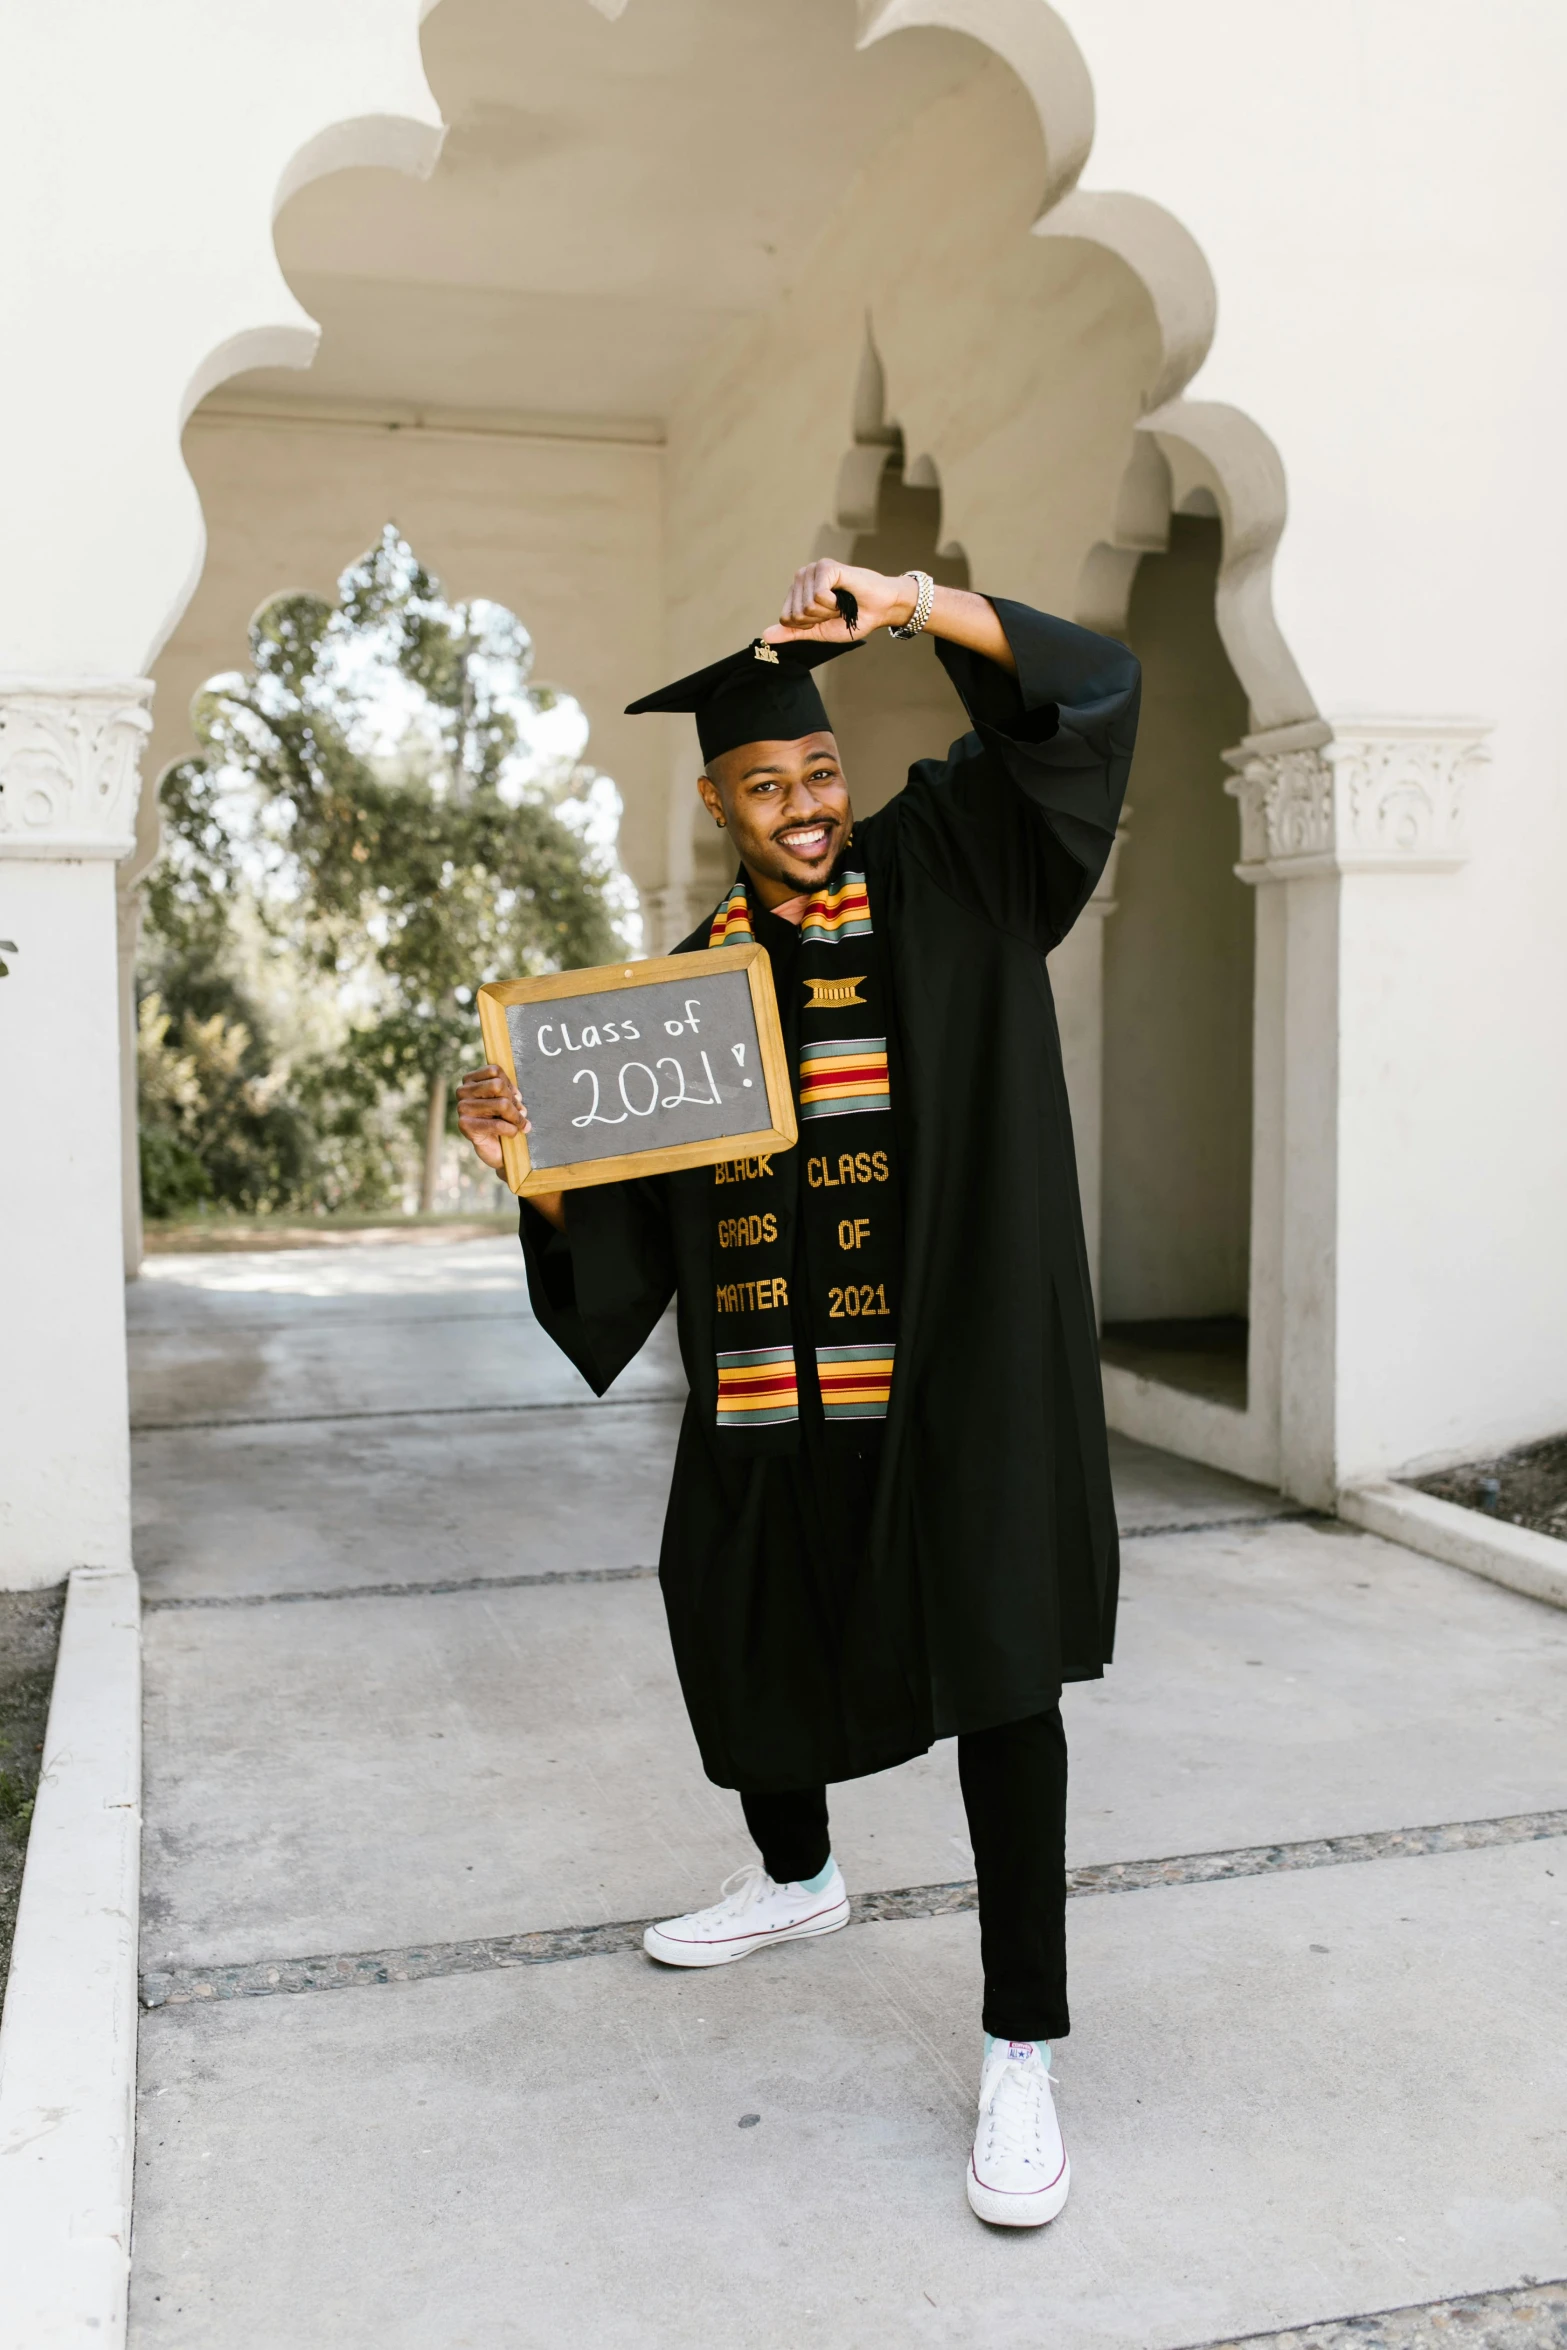 a black male graduates smiling and holding a sign